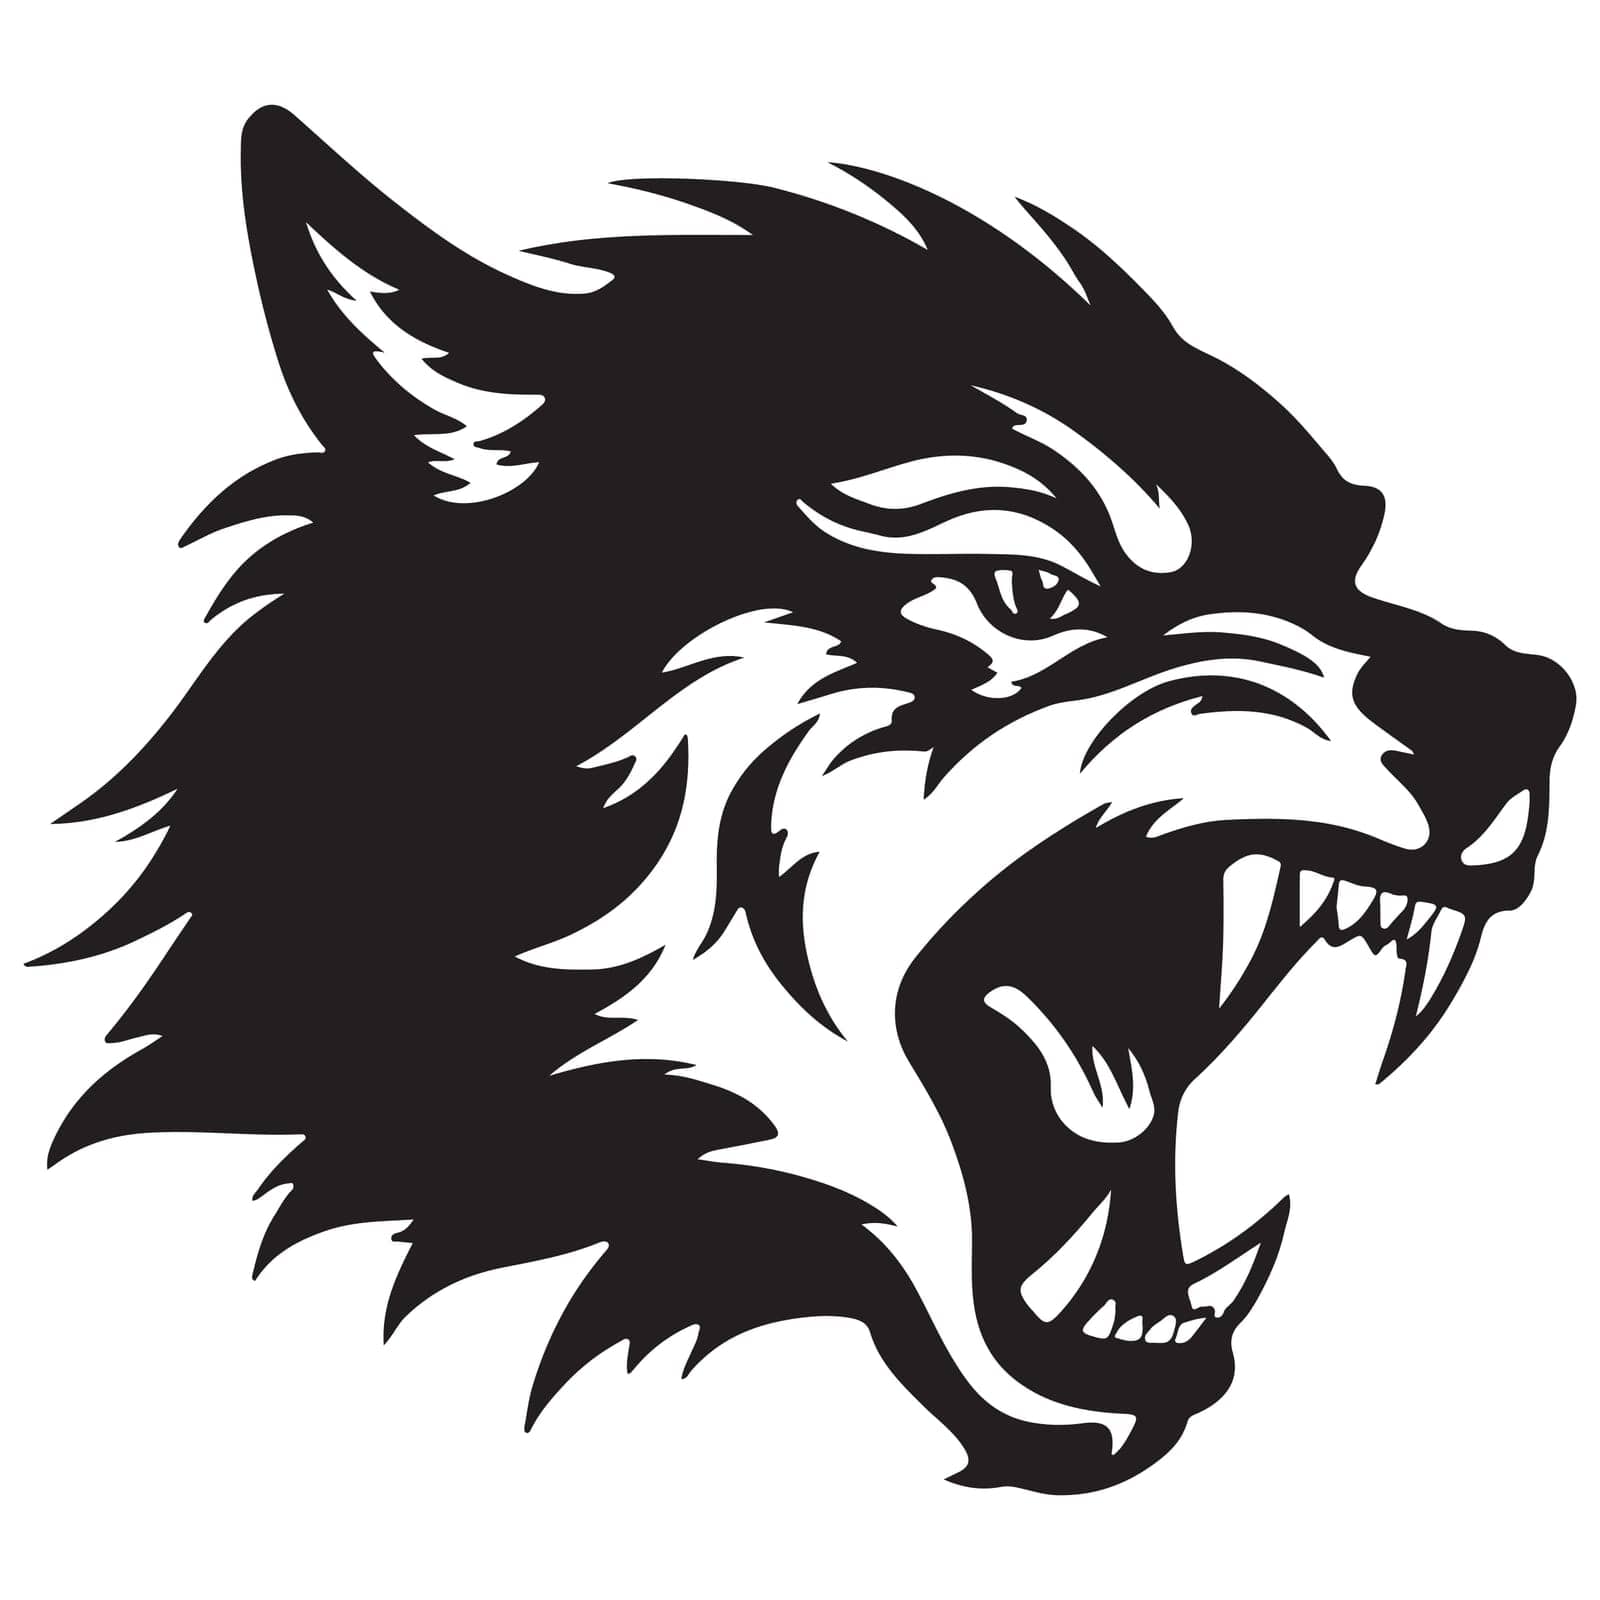 Angry Wolf Head Black and White Tattoo Illustration. Vector illustration